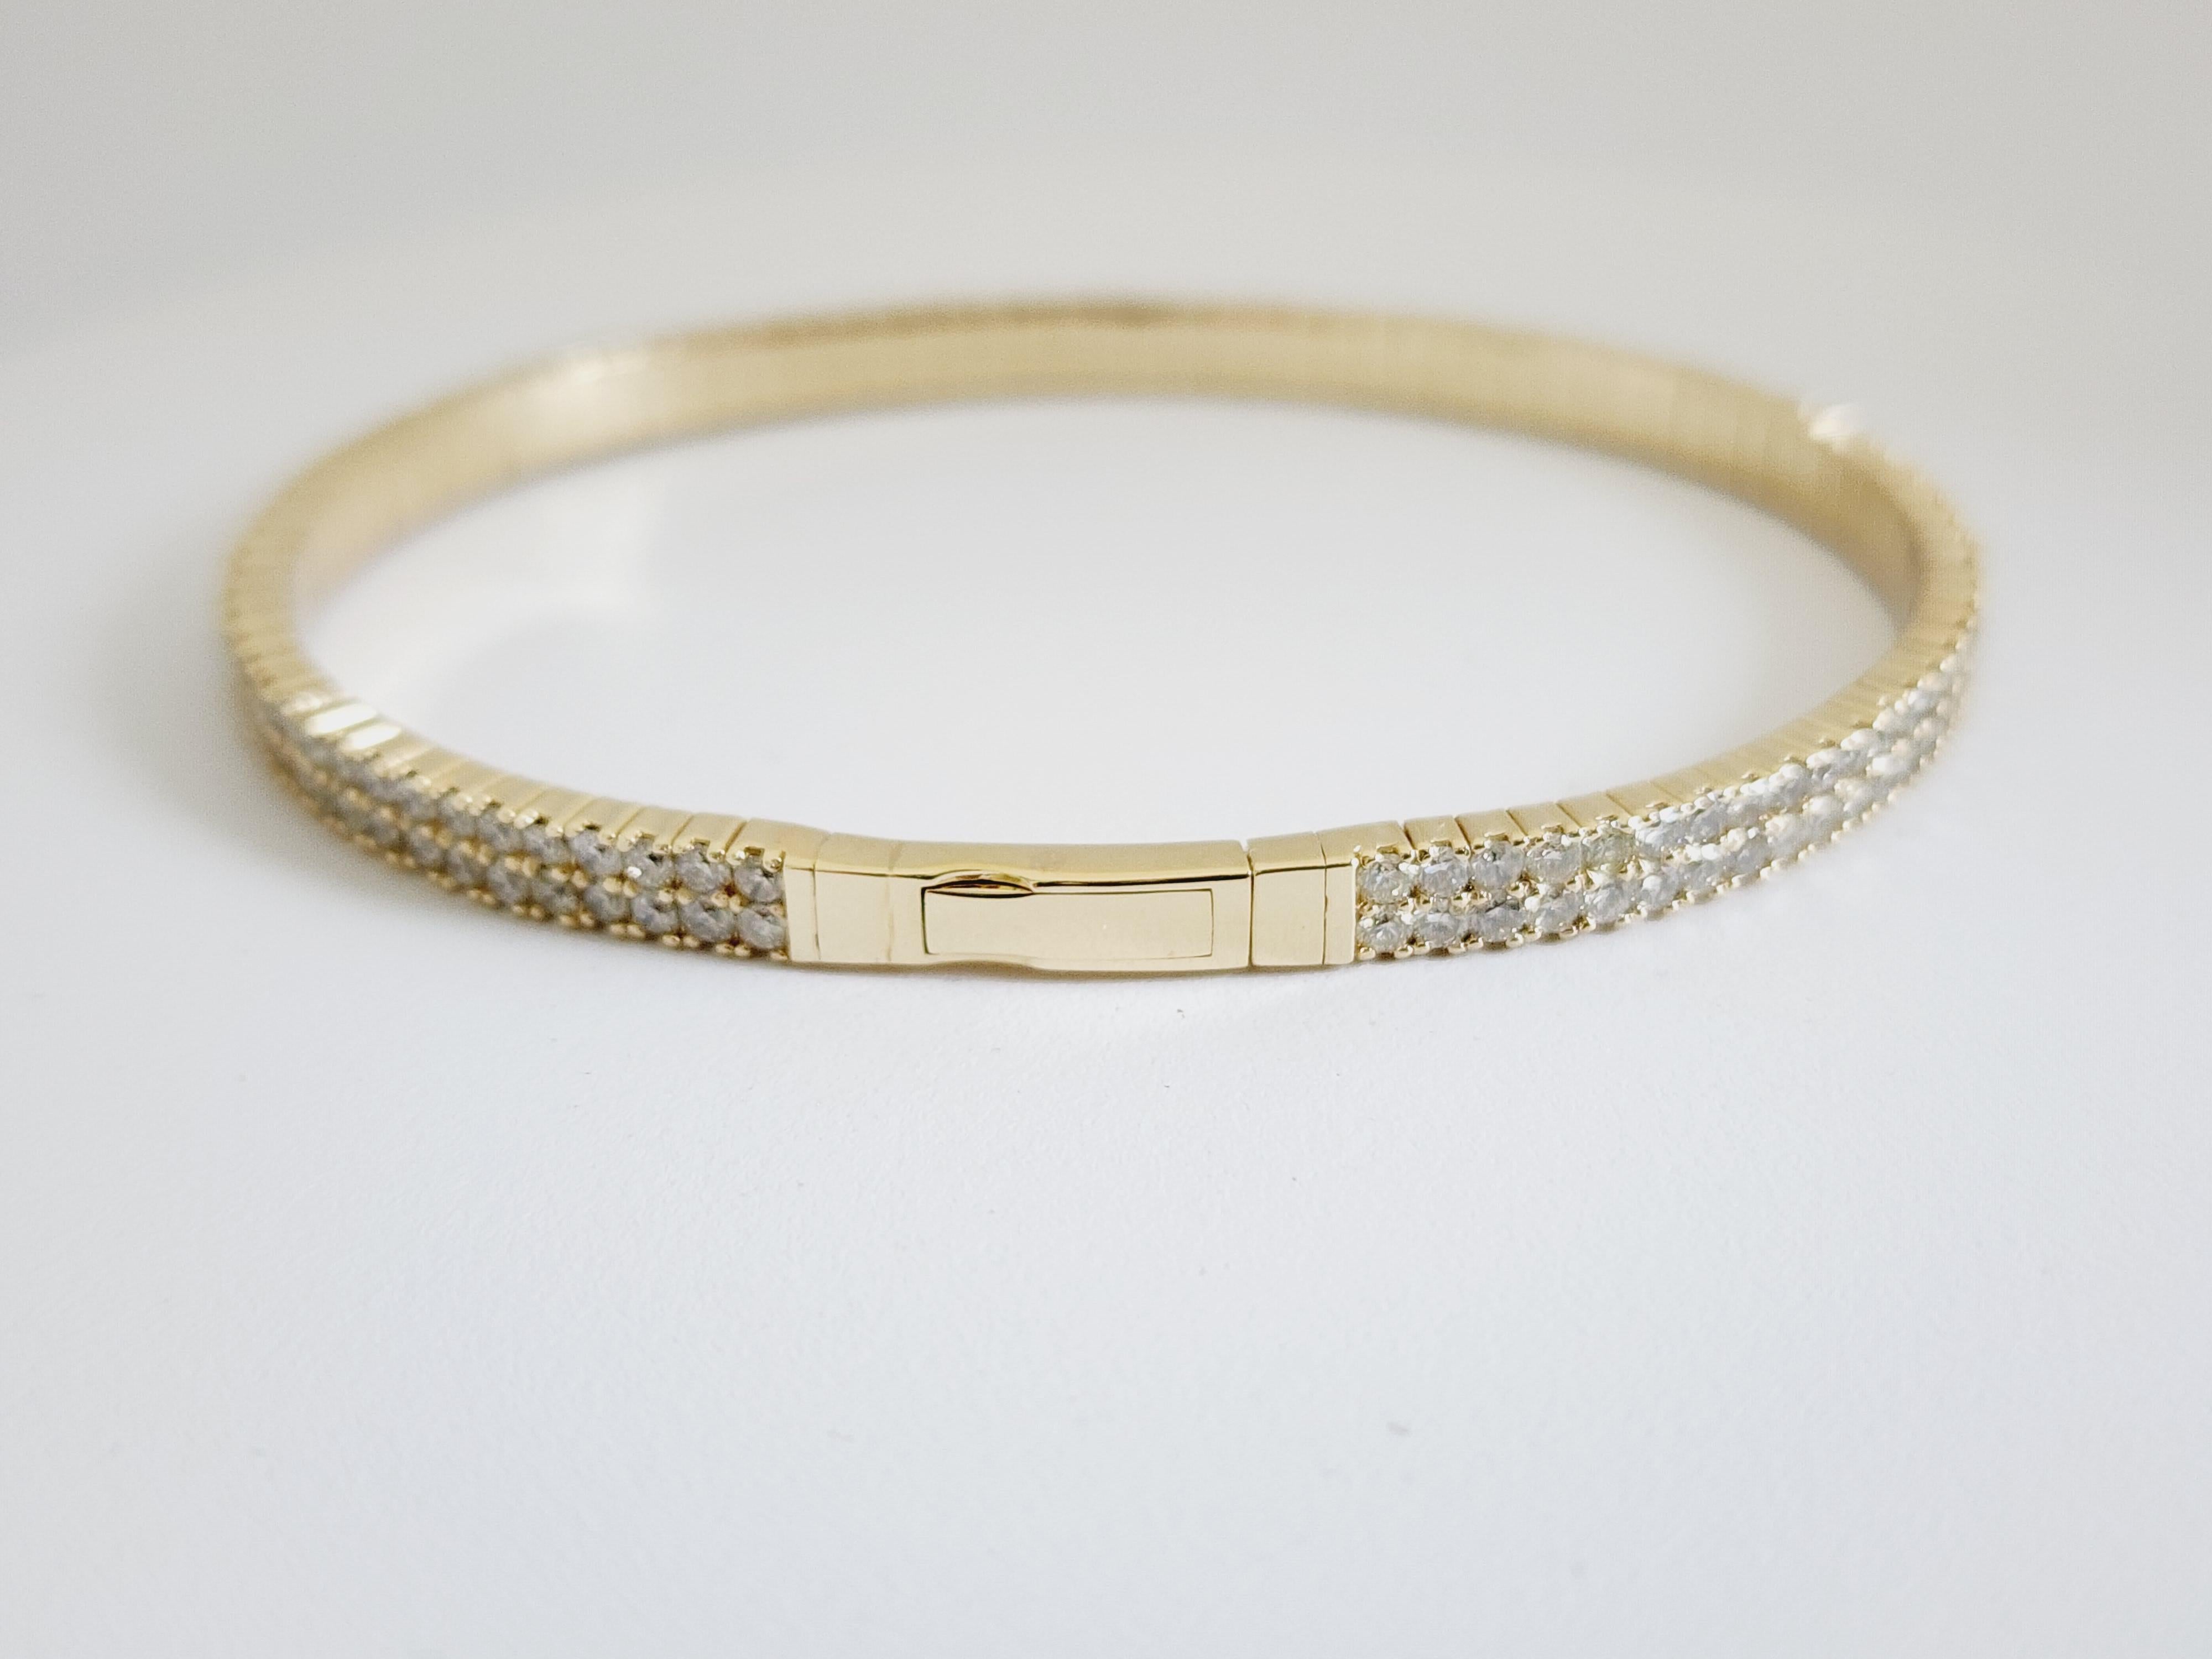 4.77 Carat Double Row Flexible Bangle Yellow Gold 14 Karat Bracelet In New Condition For Sale In Great Neck, NY